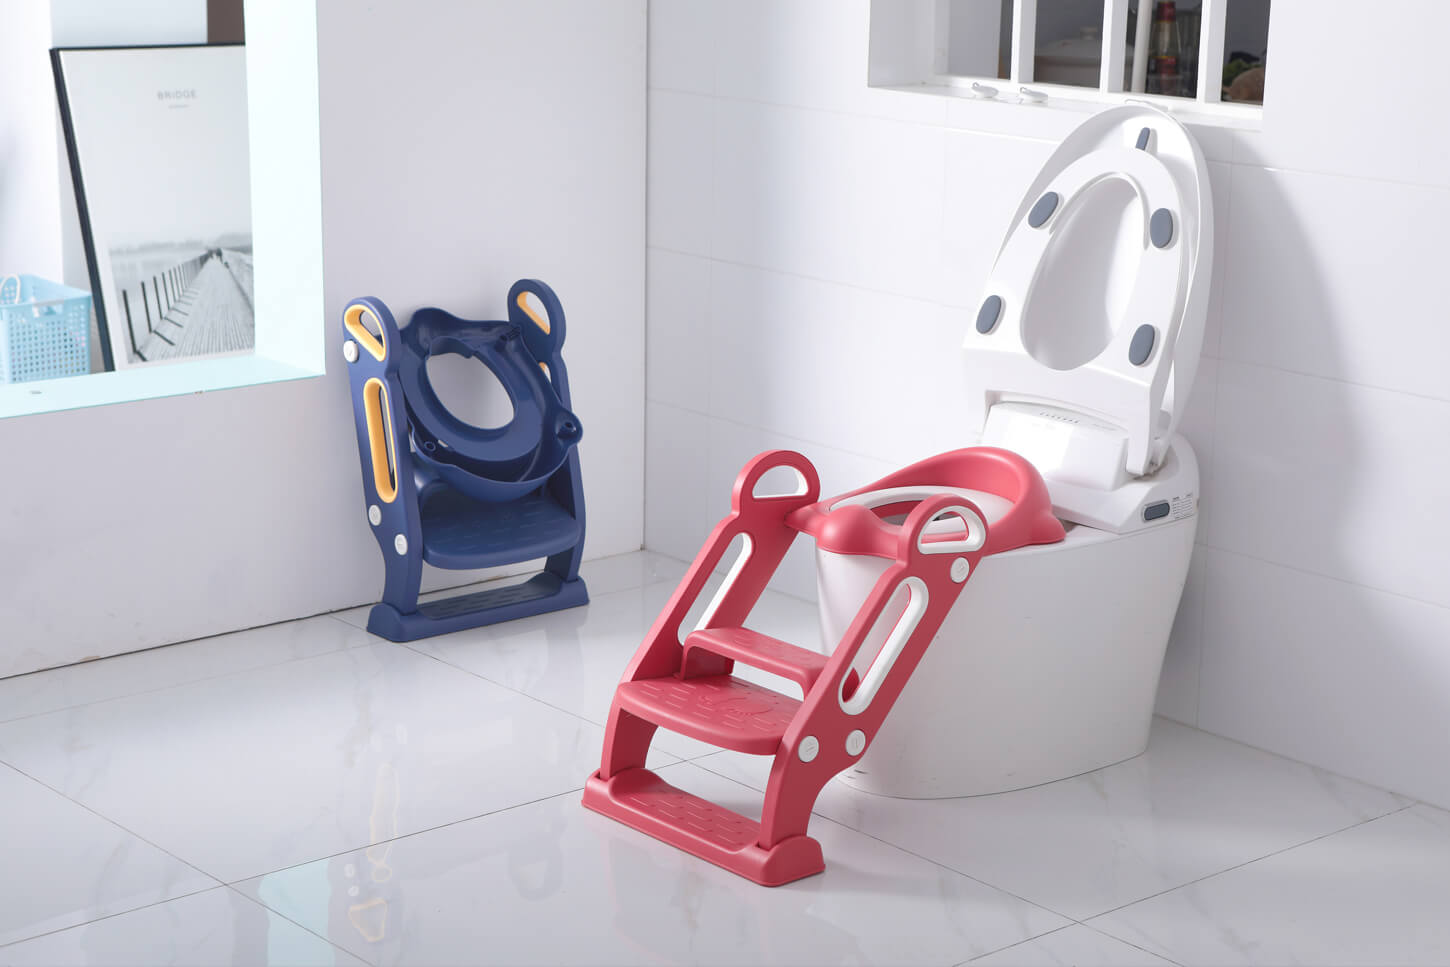 Features of Babyhood's Step Potty Seat